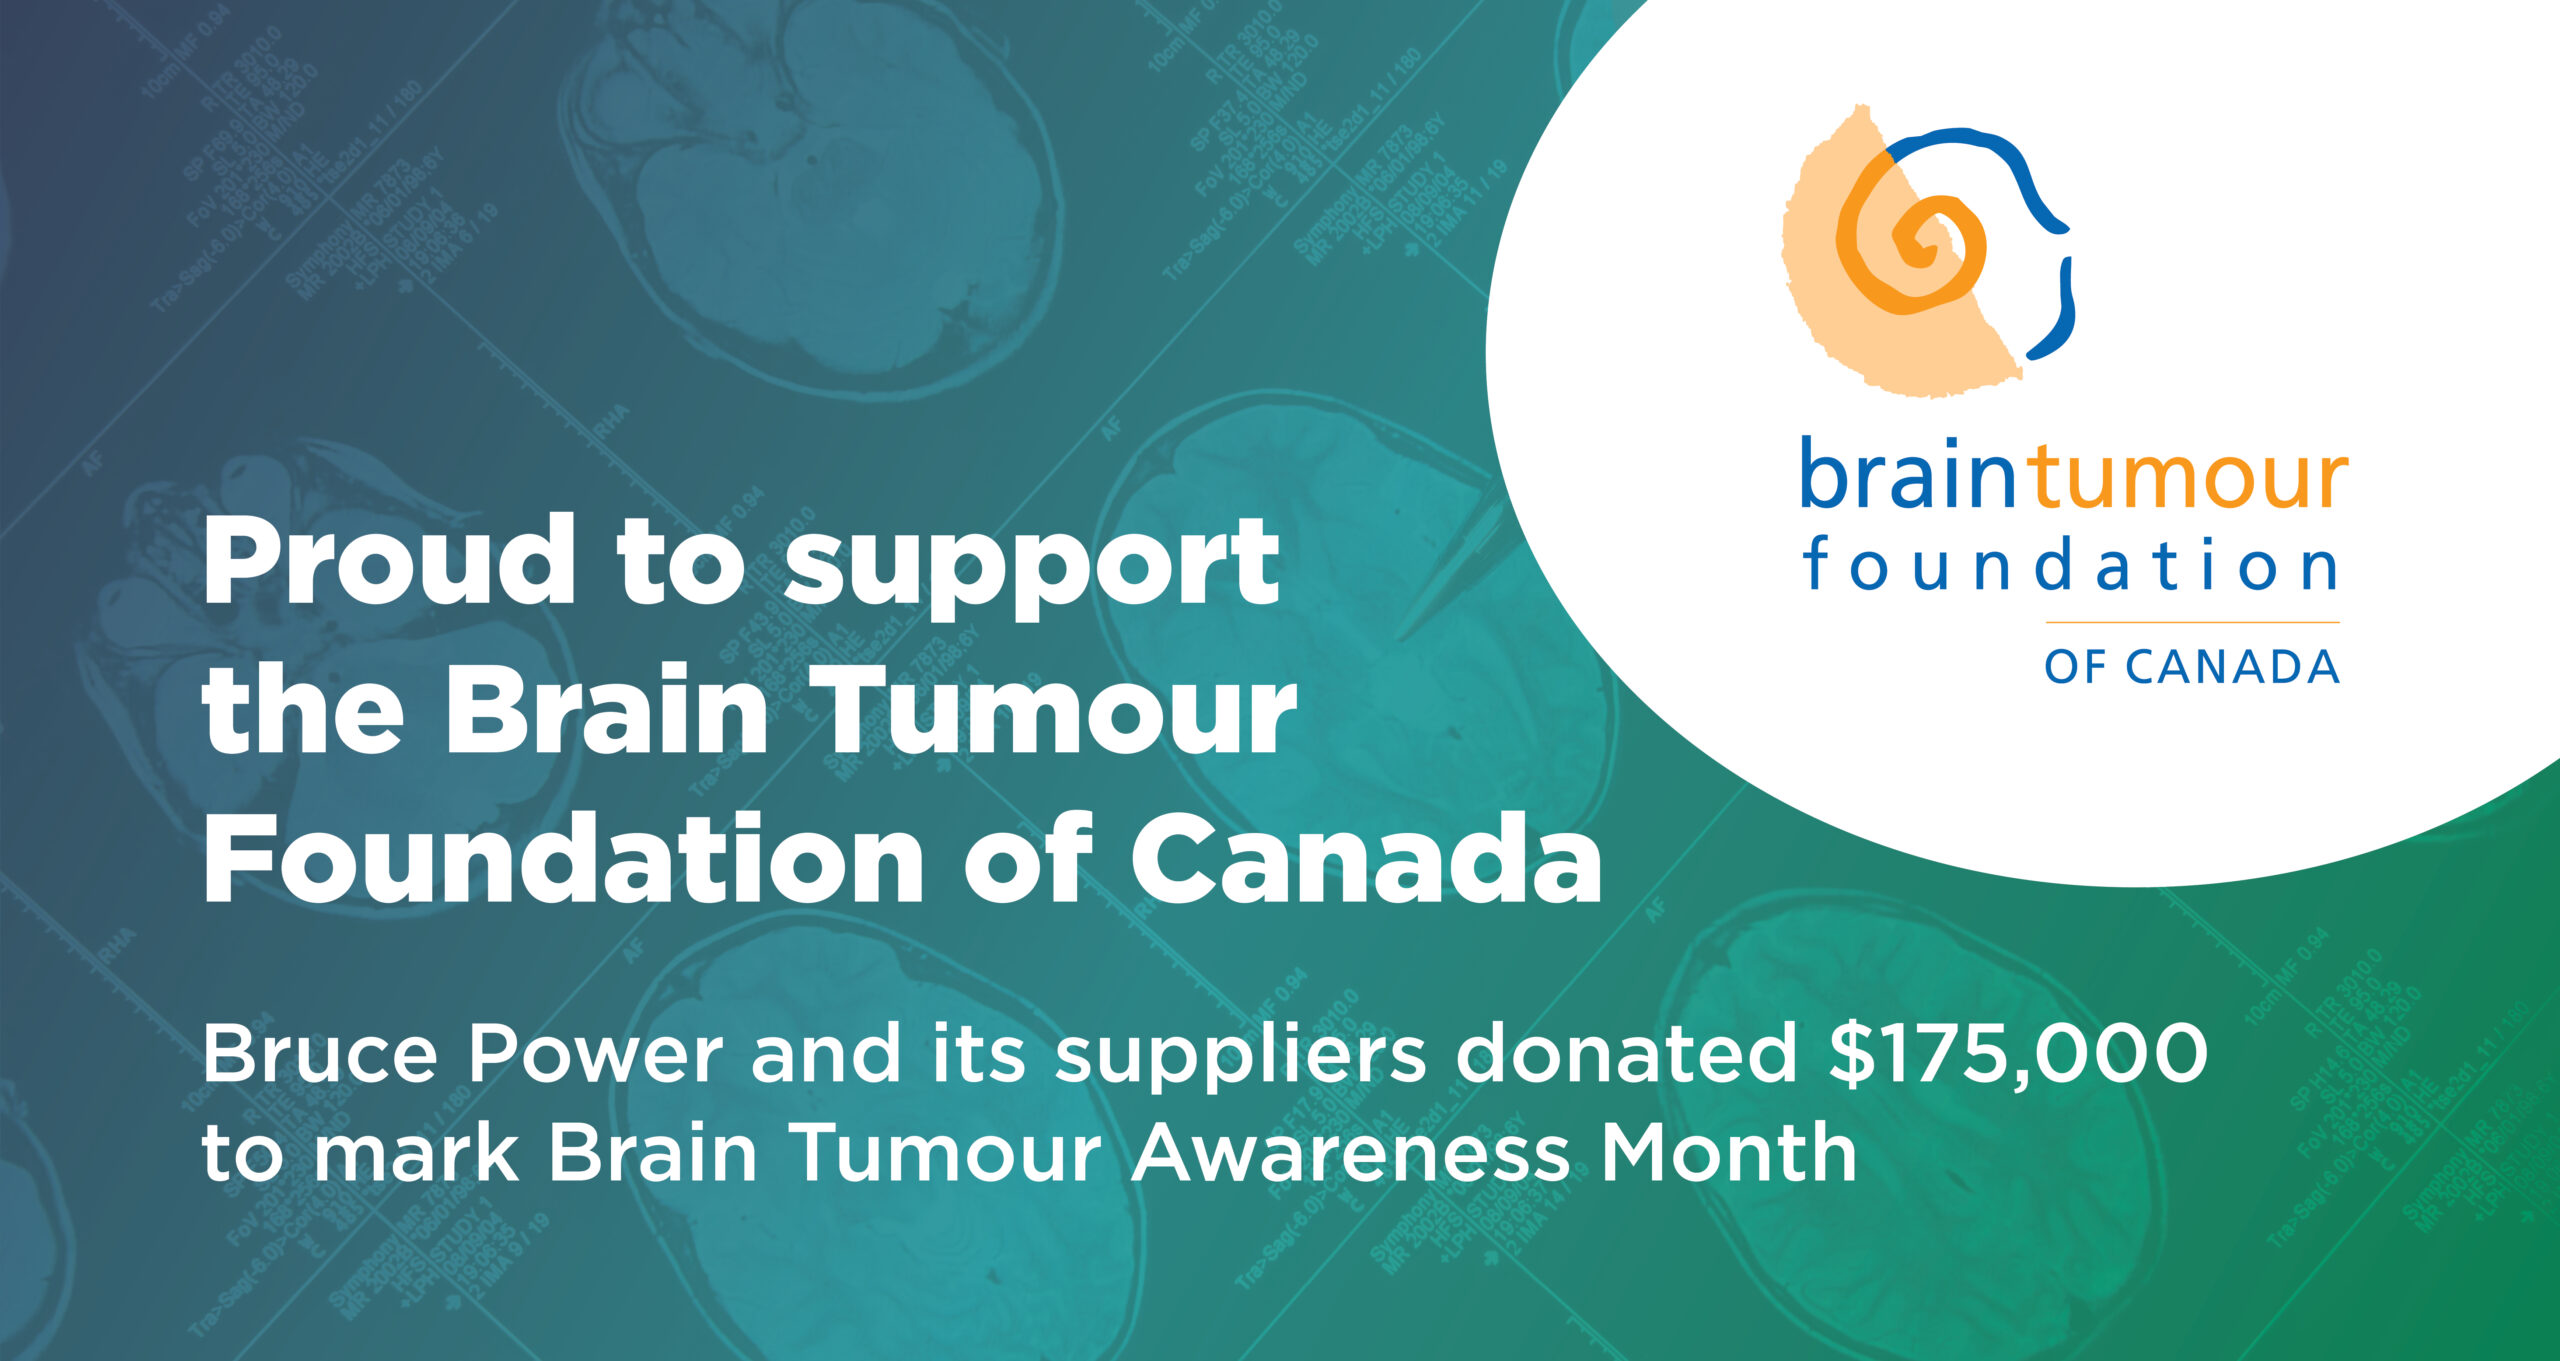 Bruce Power and Supplier Partners donate $175,000 to Brain Tumour Foundation  of Canada - Bruce Power